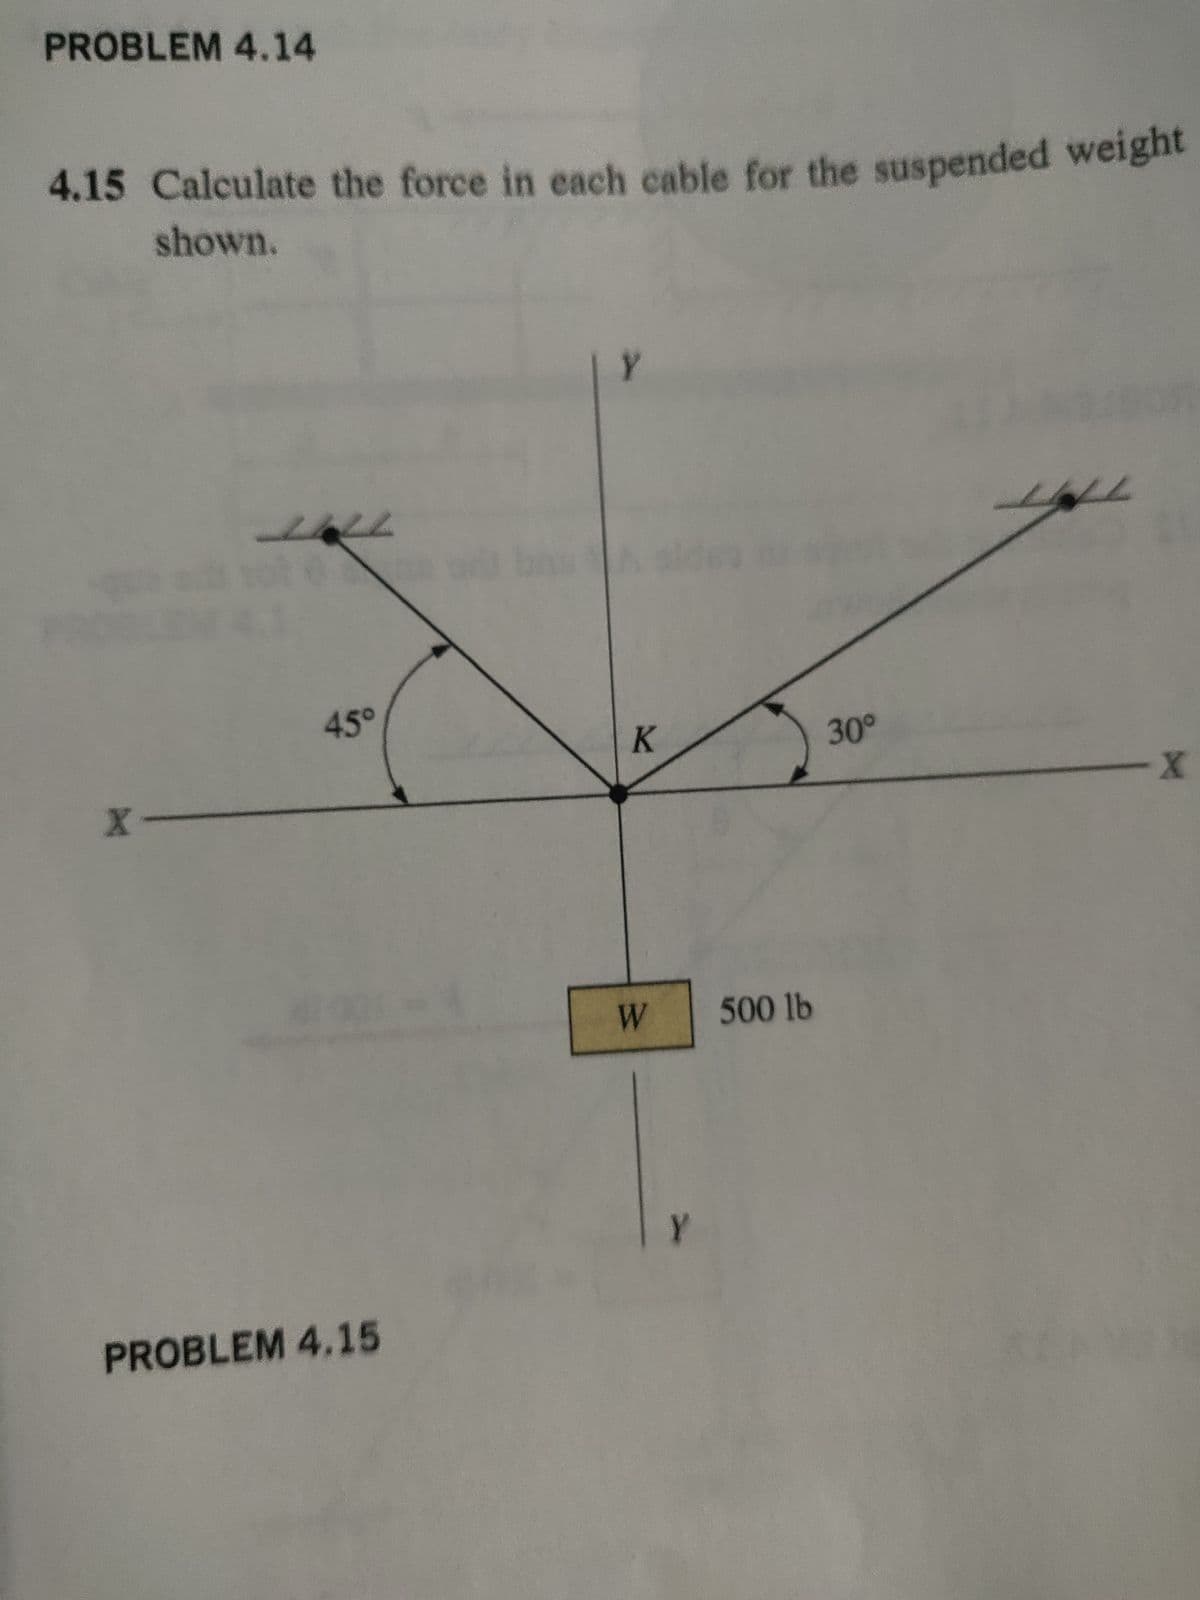 PROBLEM 4.14
4.15 Calculate the force in each cable for the suspended weight
shown.
X-
2142
45°
PROBLEM 4.15
Y
K
W
Y
500 lb
30°
X